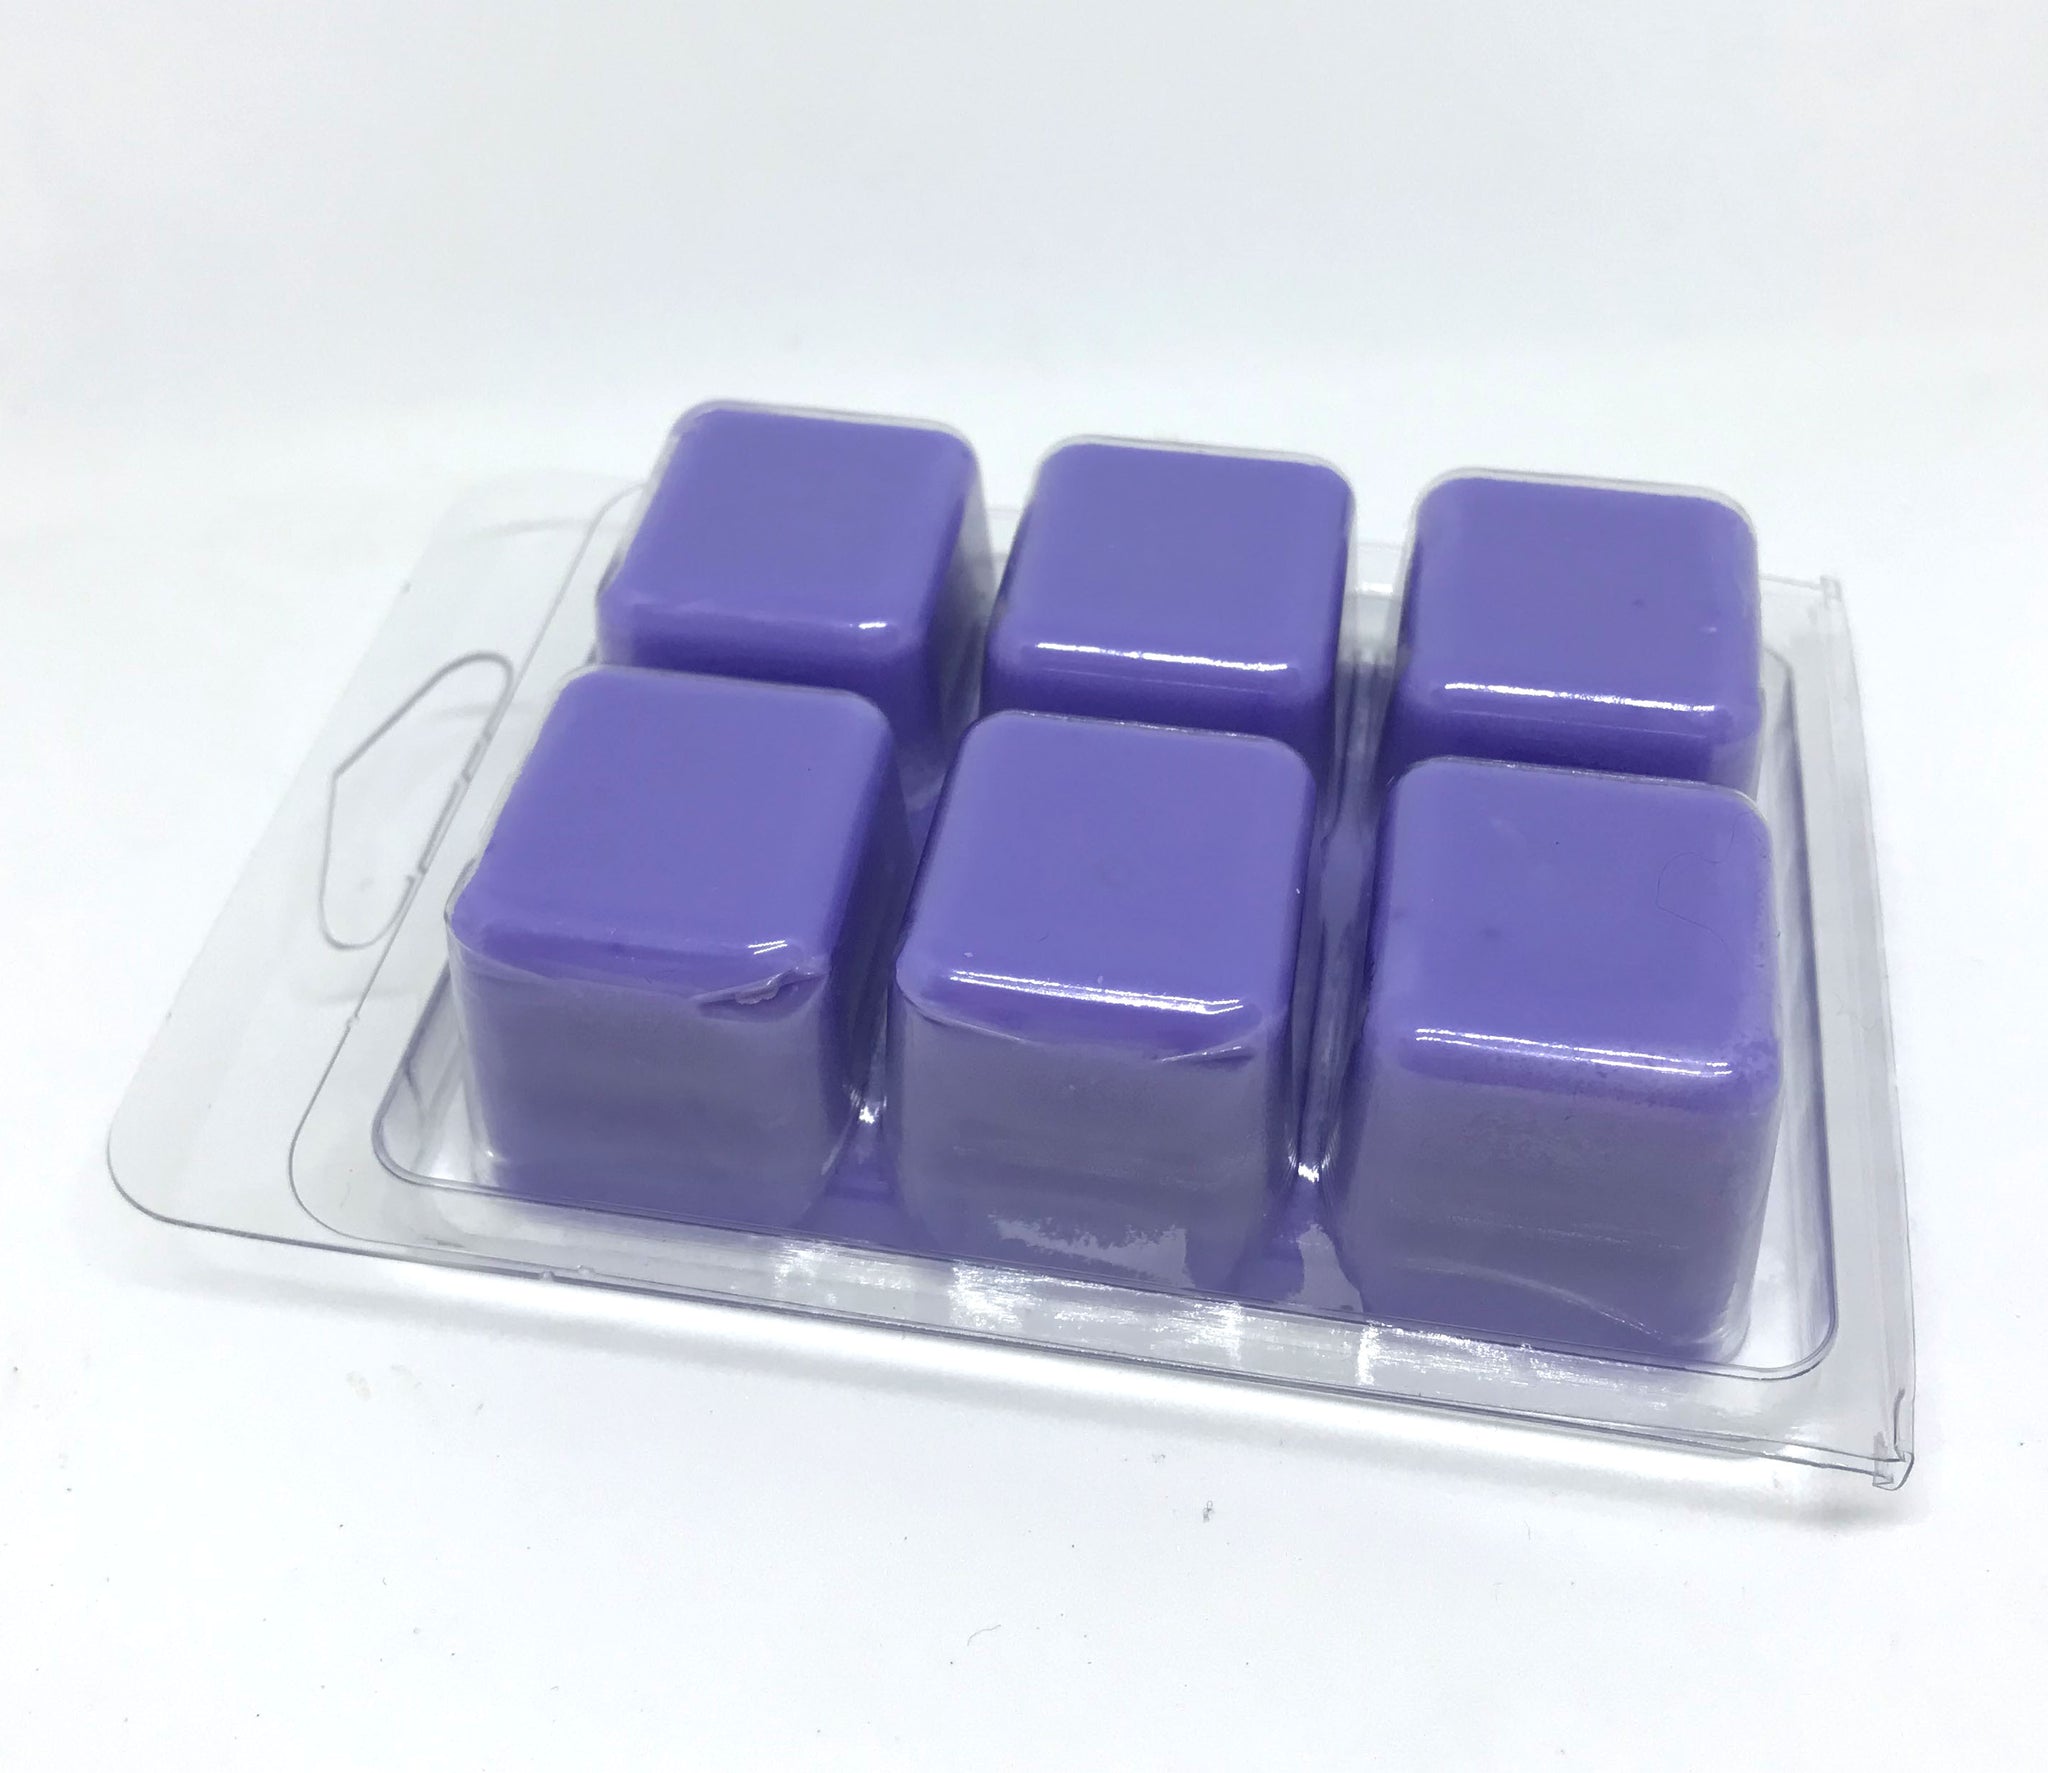 Bob's Burgers Tina Belcher Inspired Soy Wax Melts Blueberry Delivery Girl